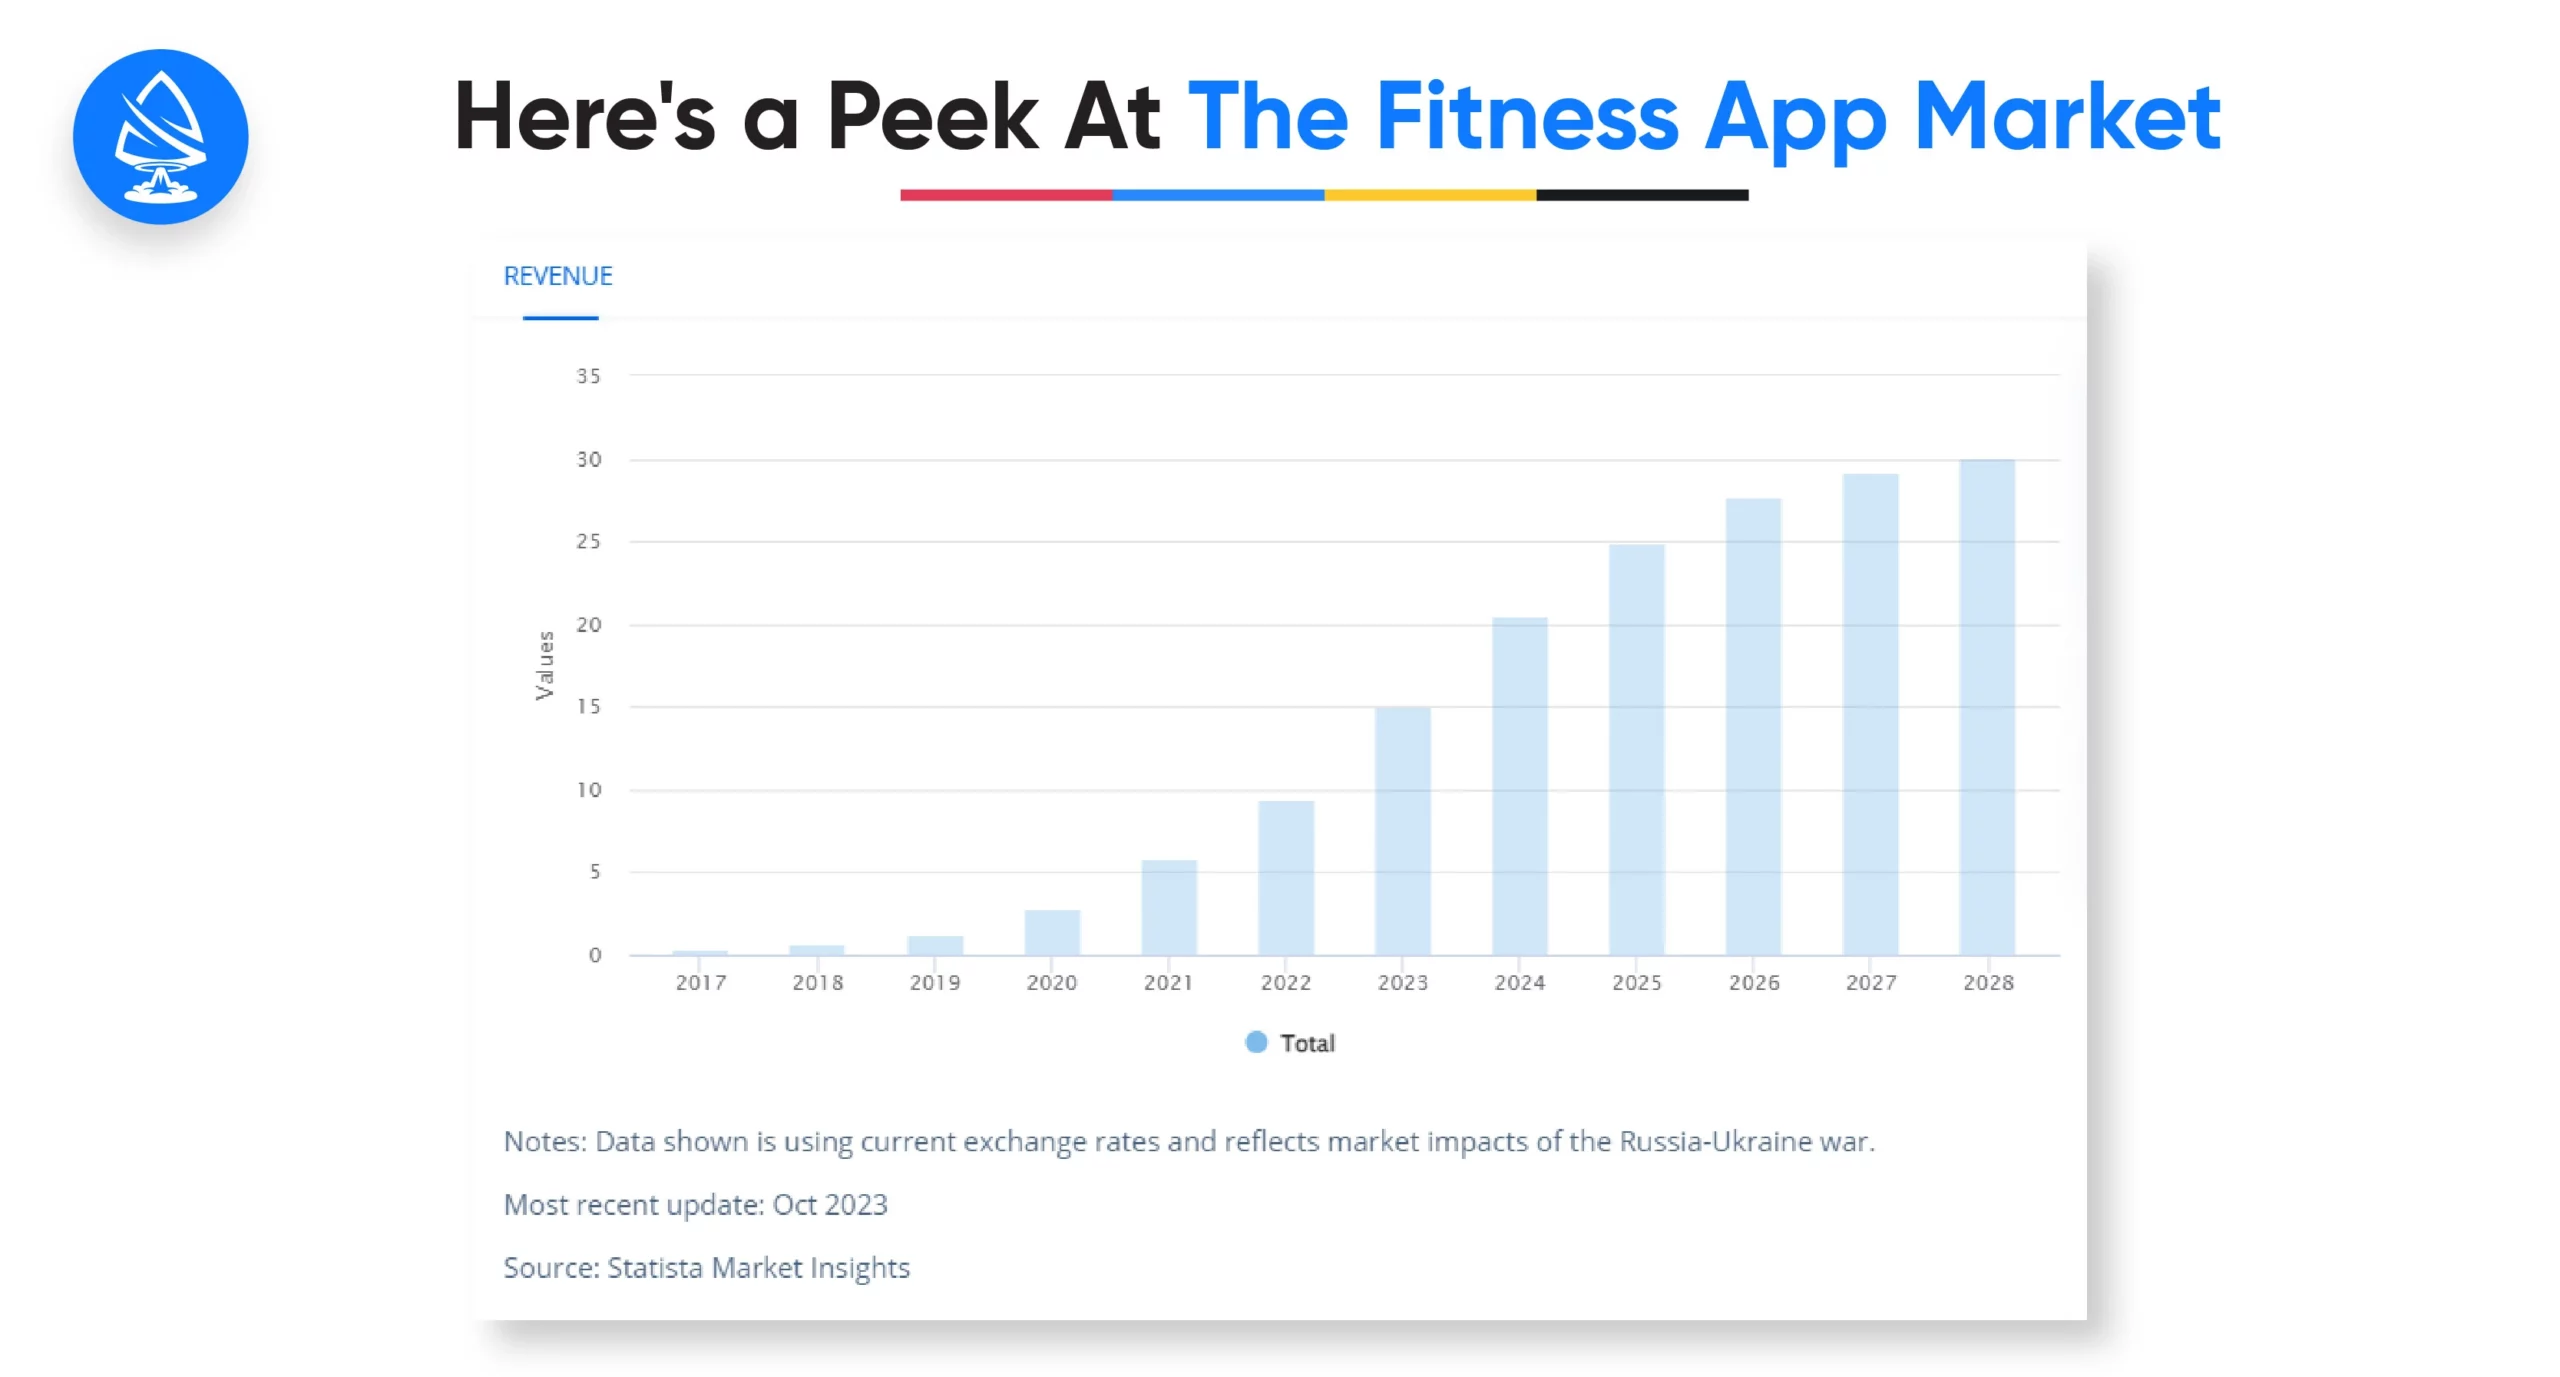 Here's a peek at the fitness app market: